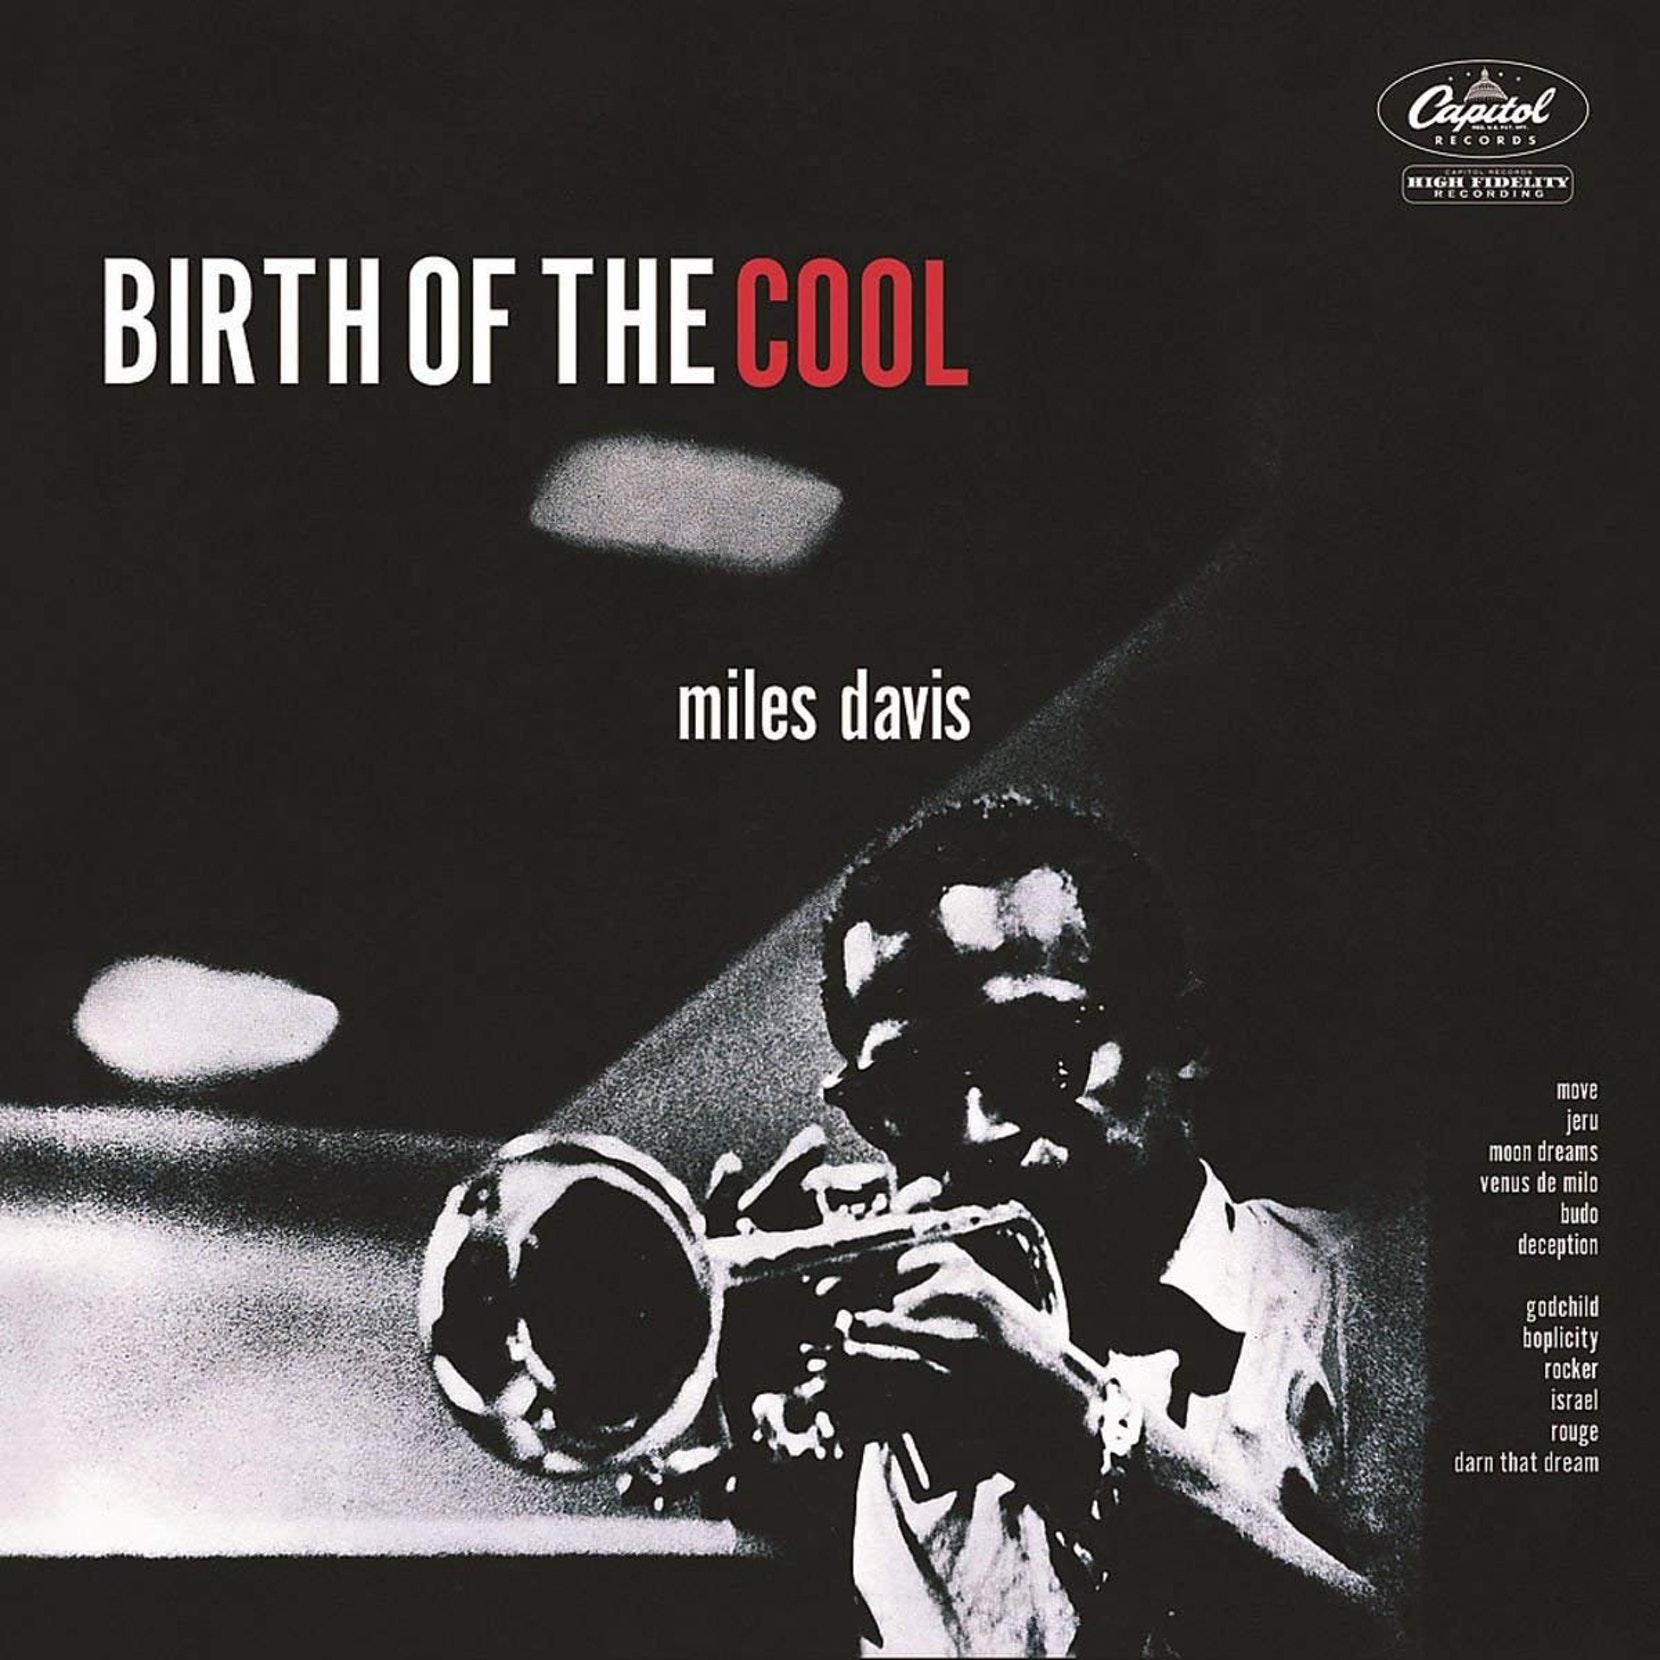 Miles Davis - (Vinyl) - Complete Of The Birth The Cool